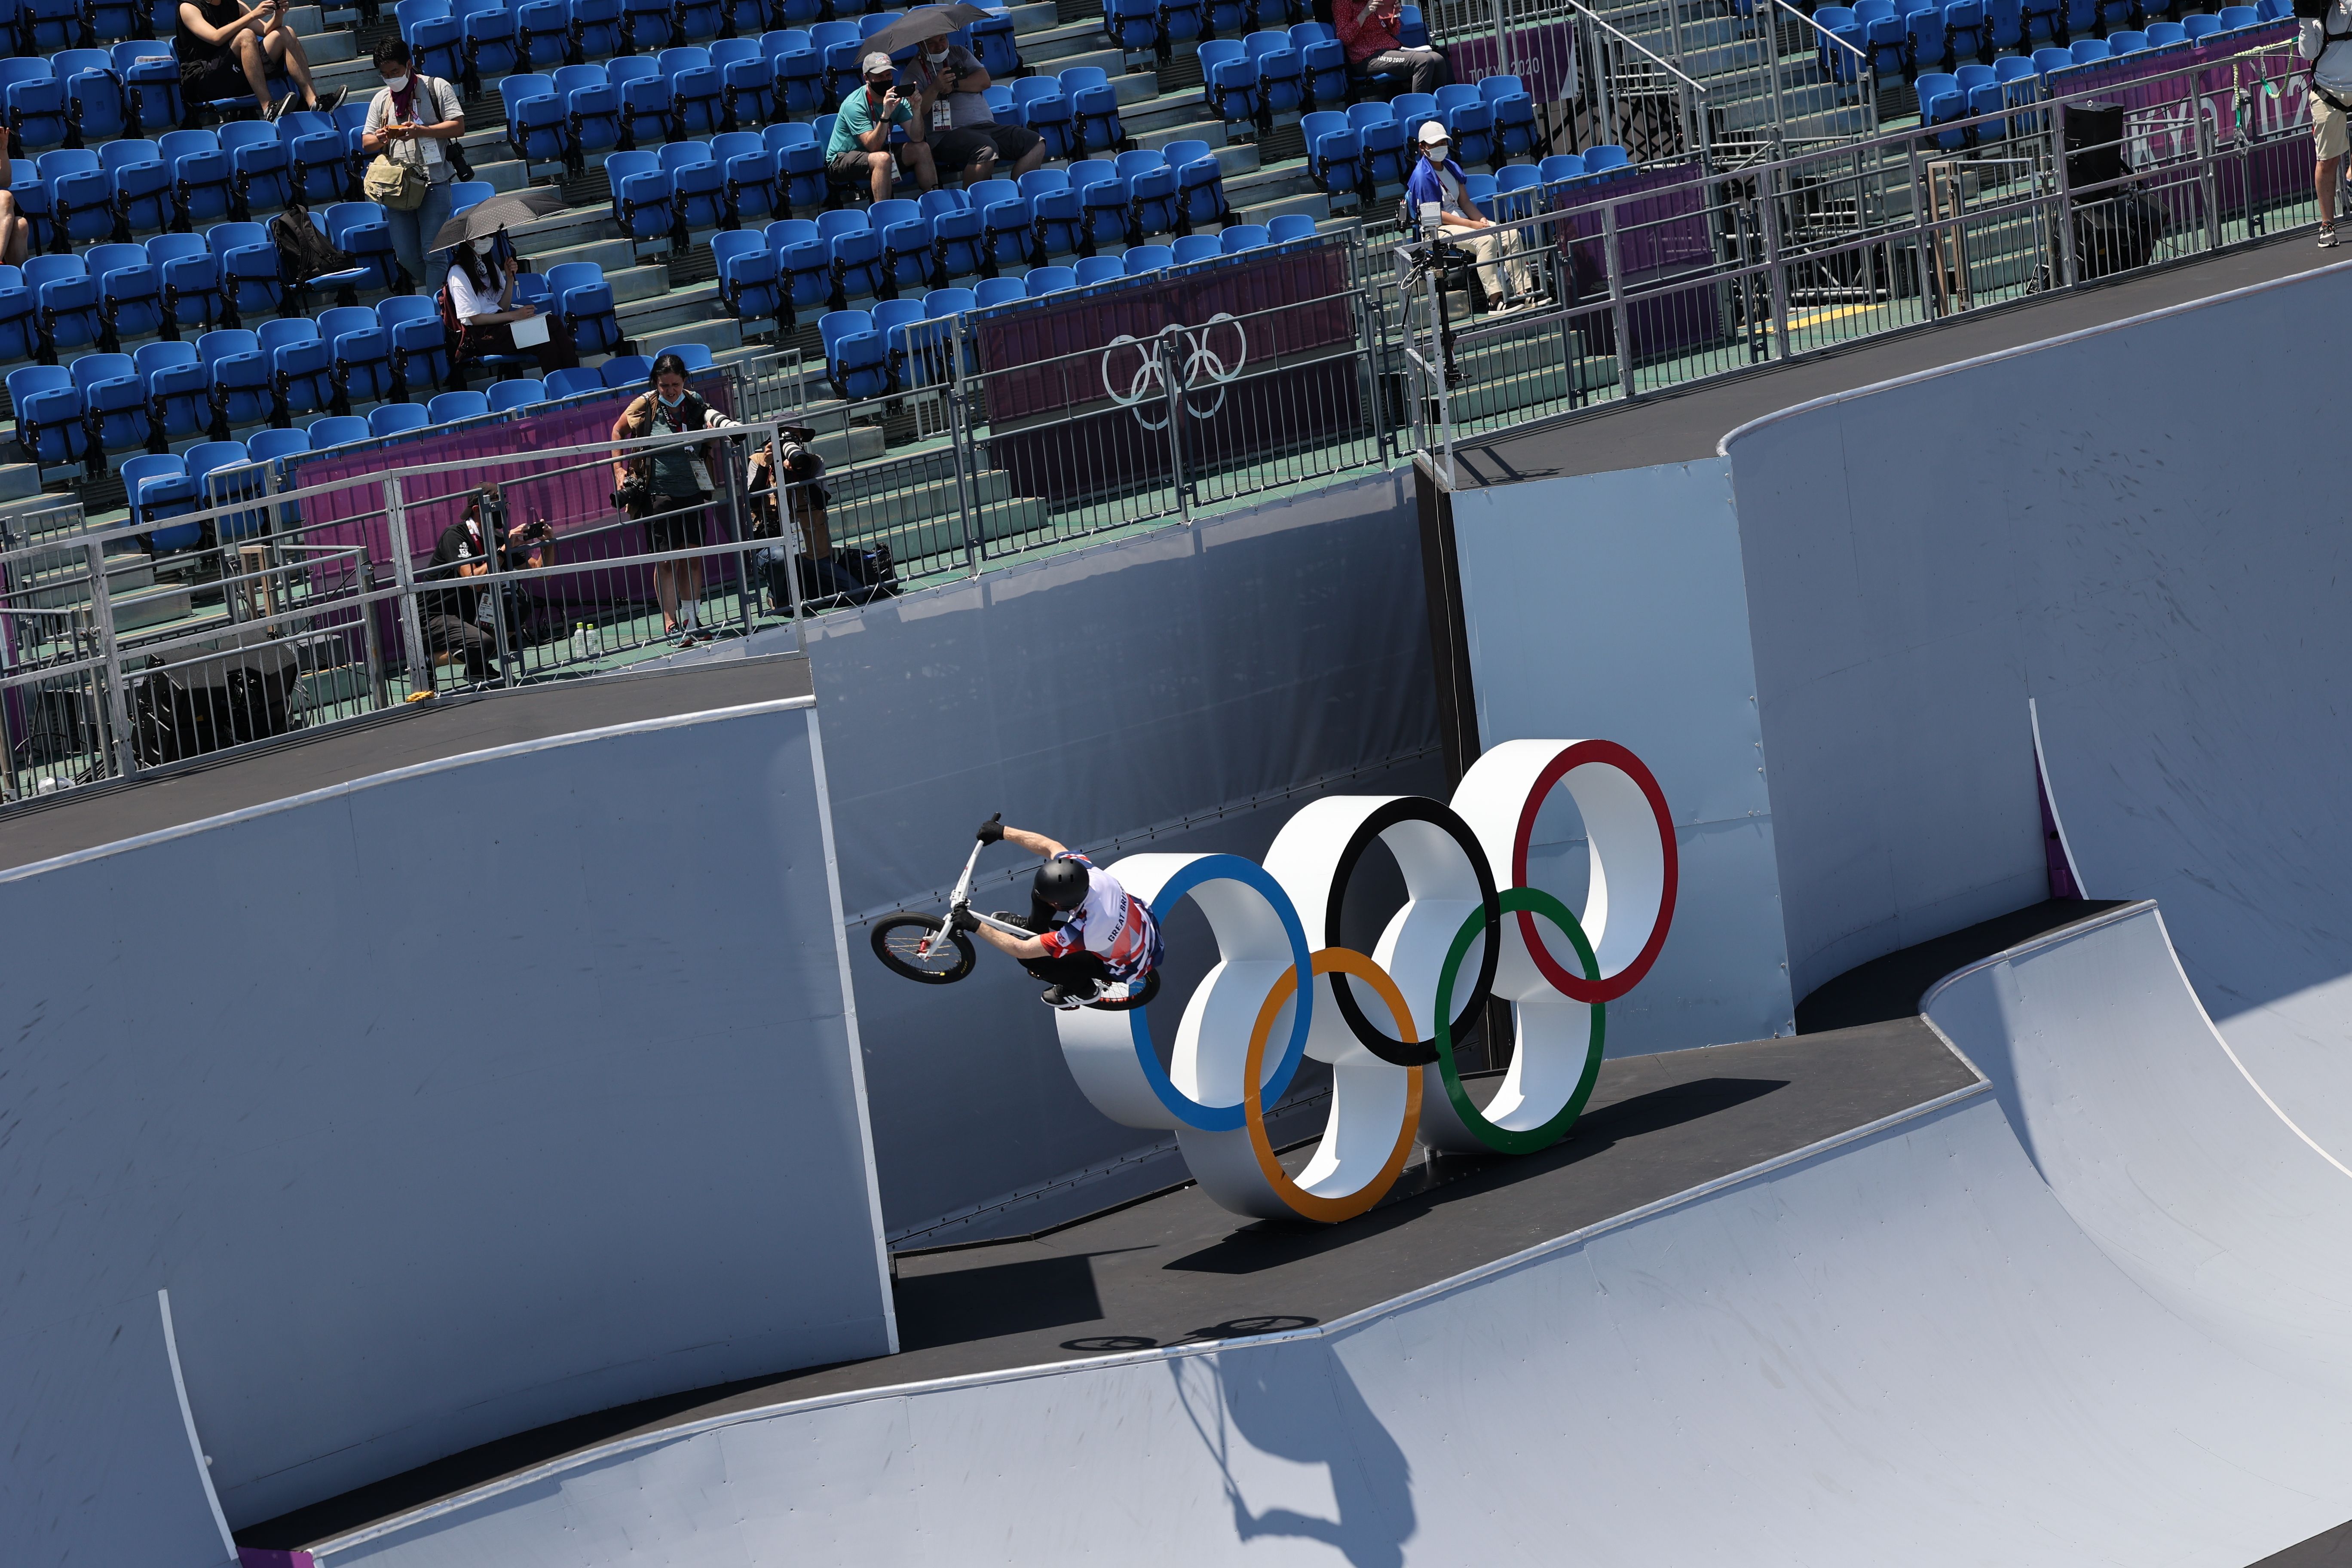 More action from the men's BMX freestyle on Aug. 1.